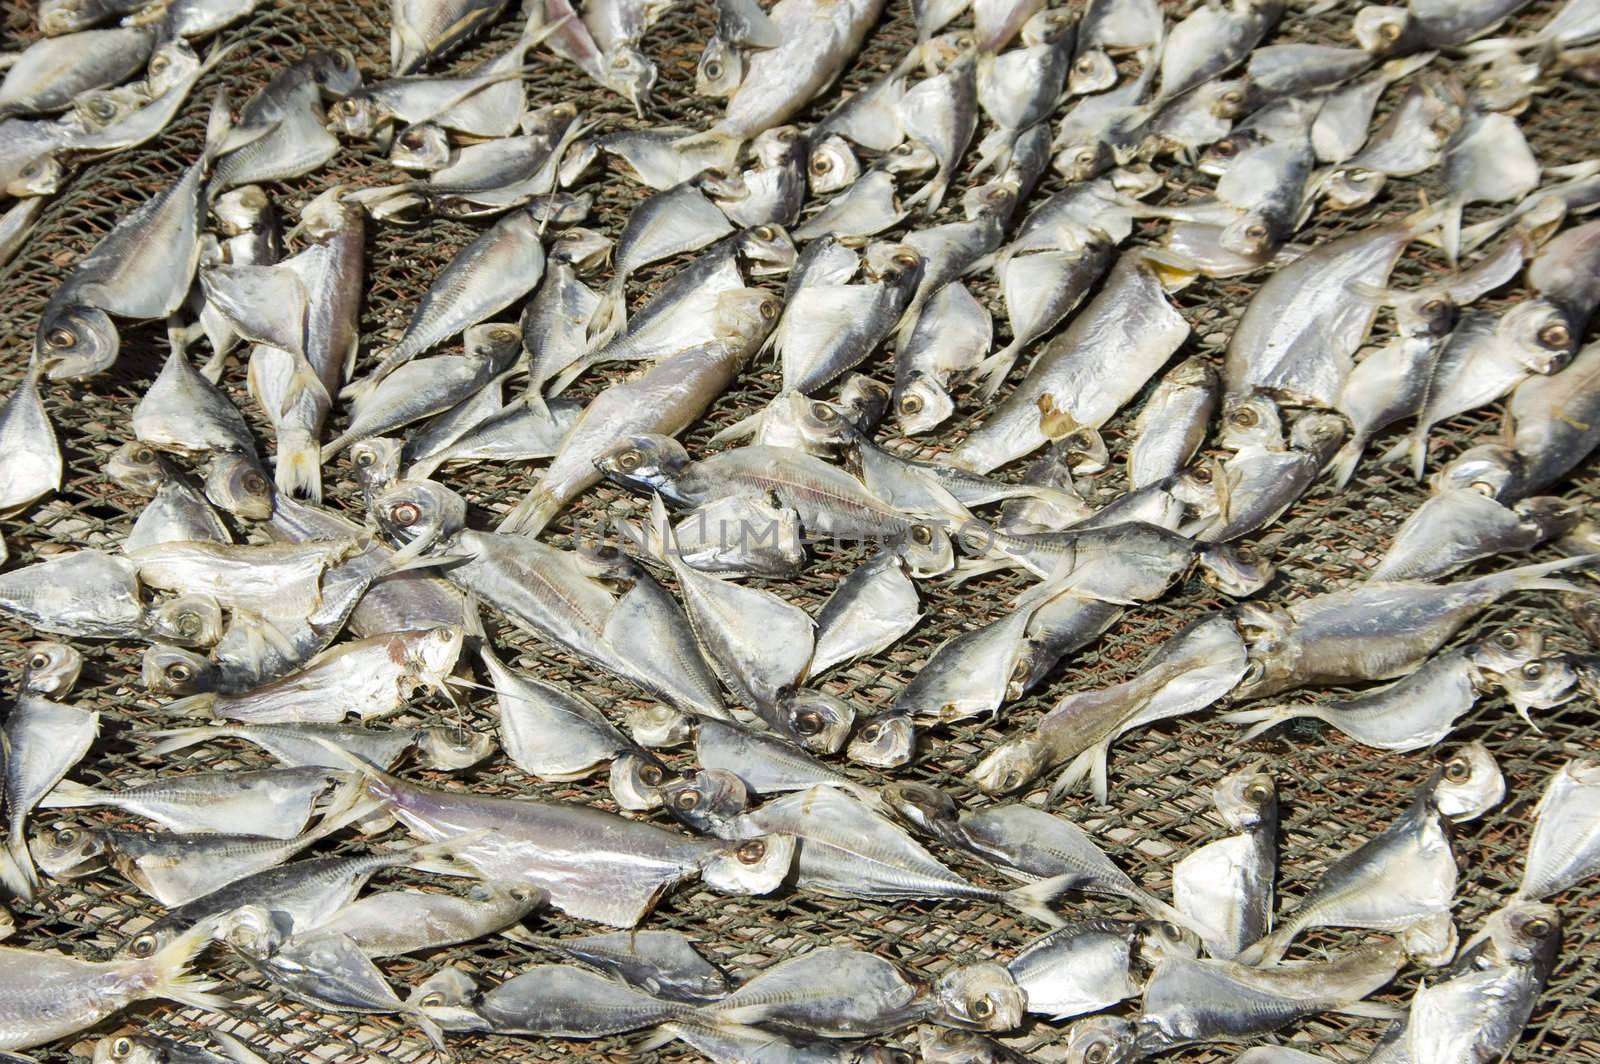 drying salted fish under hot sun 